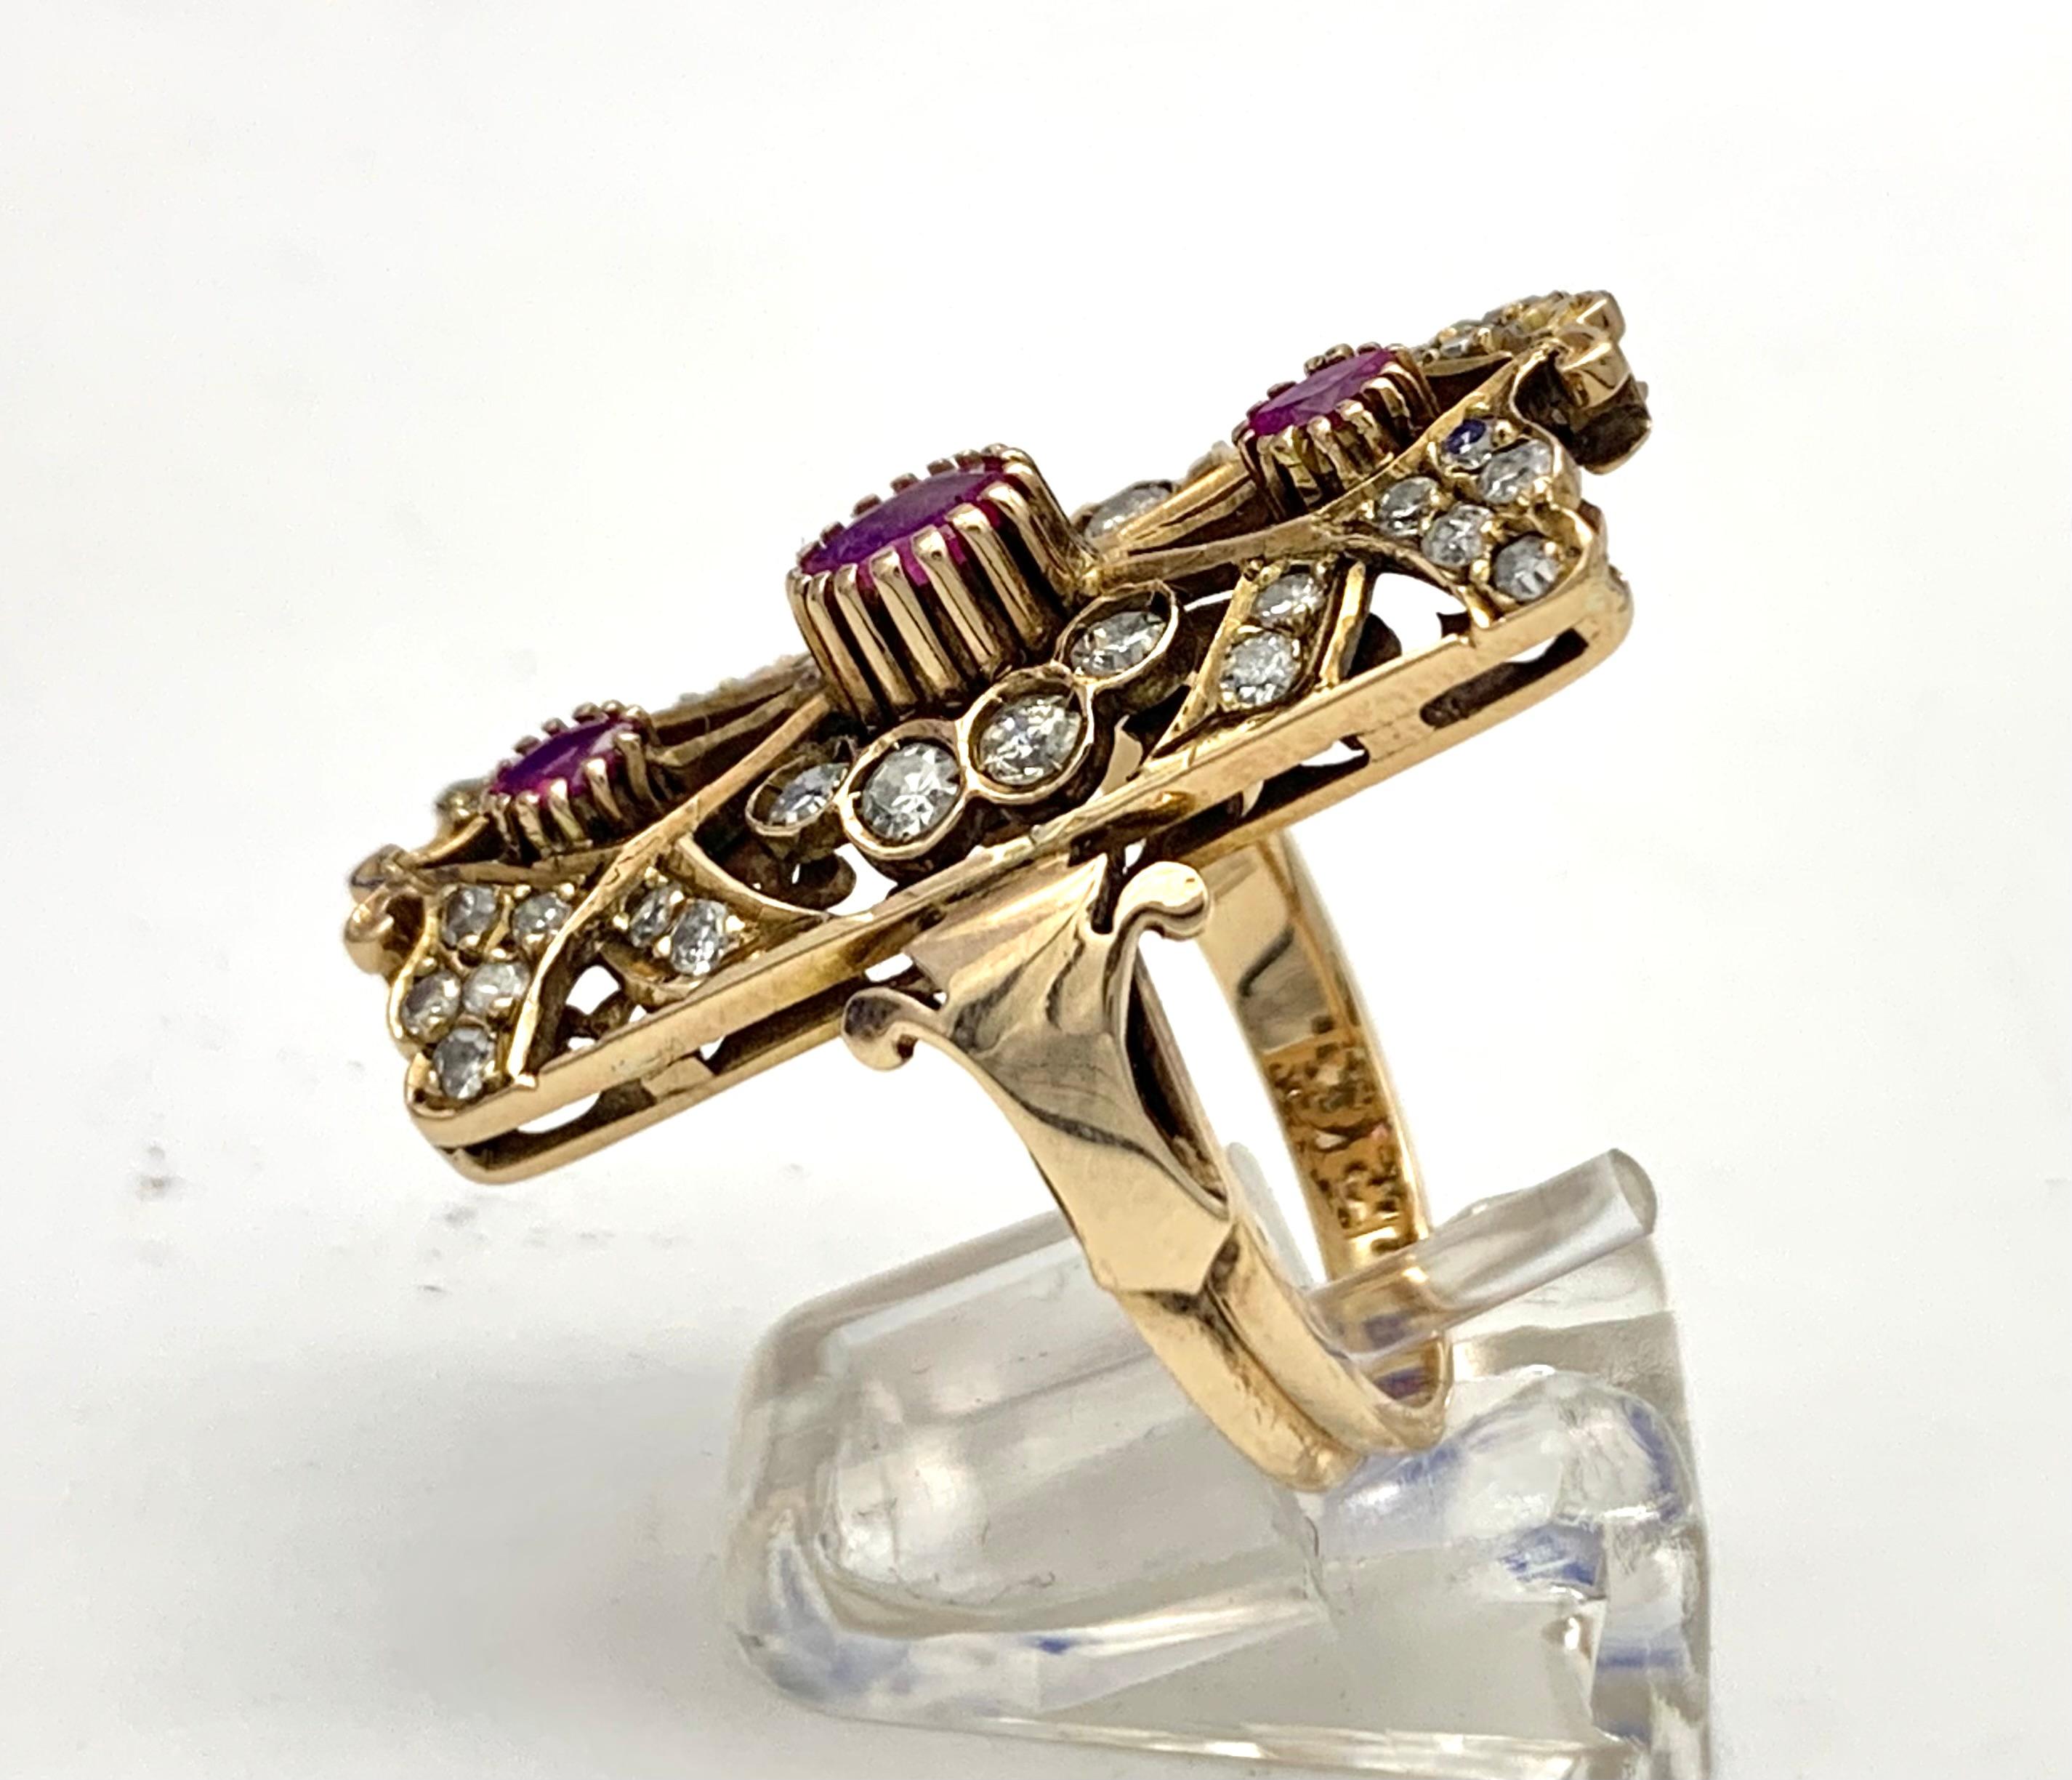 This stunning Art Nouveau ring is designed as a stylized flower and stylized leaves. The flower is decorated with an oval ruby surrounded by eight diamonds. Four leaves enclose two smaller rubies. The ornament of the front is repeated on the reverse